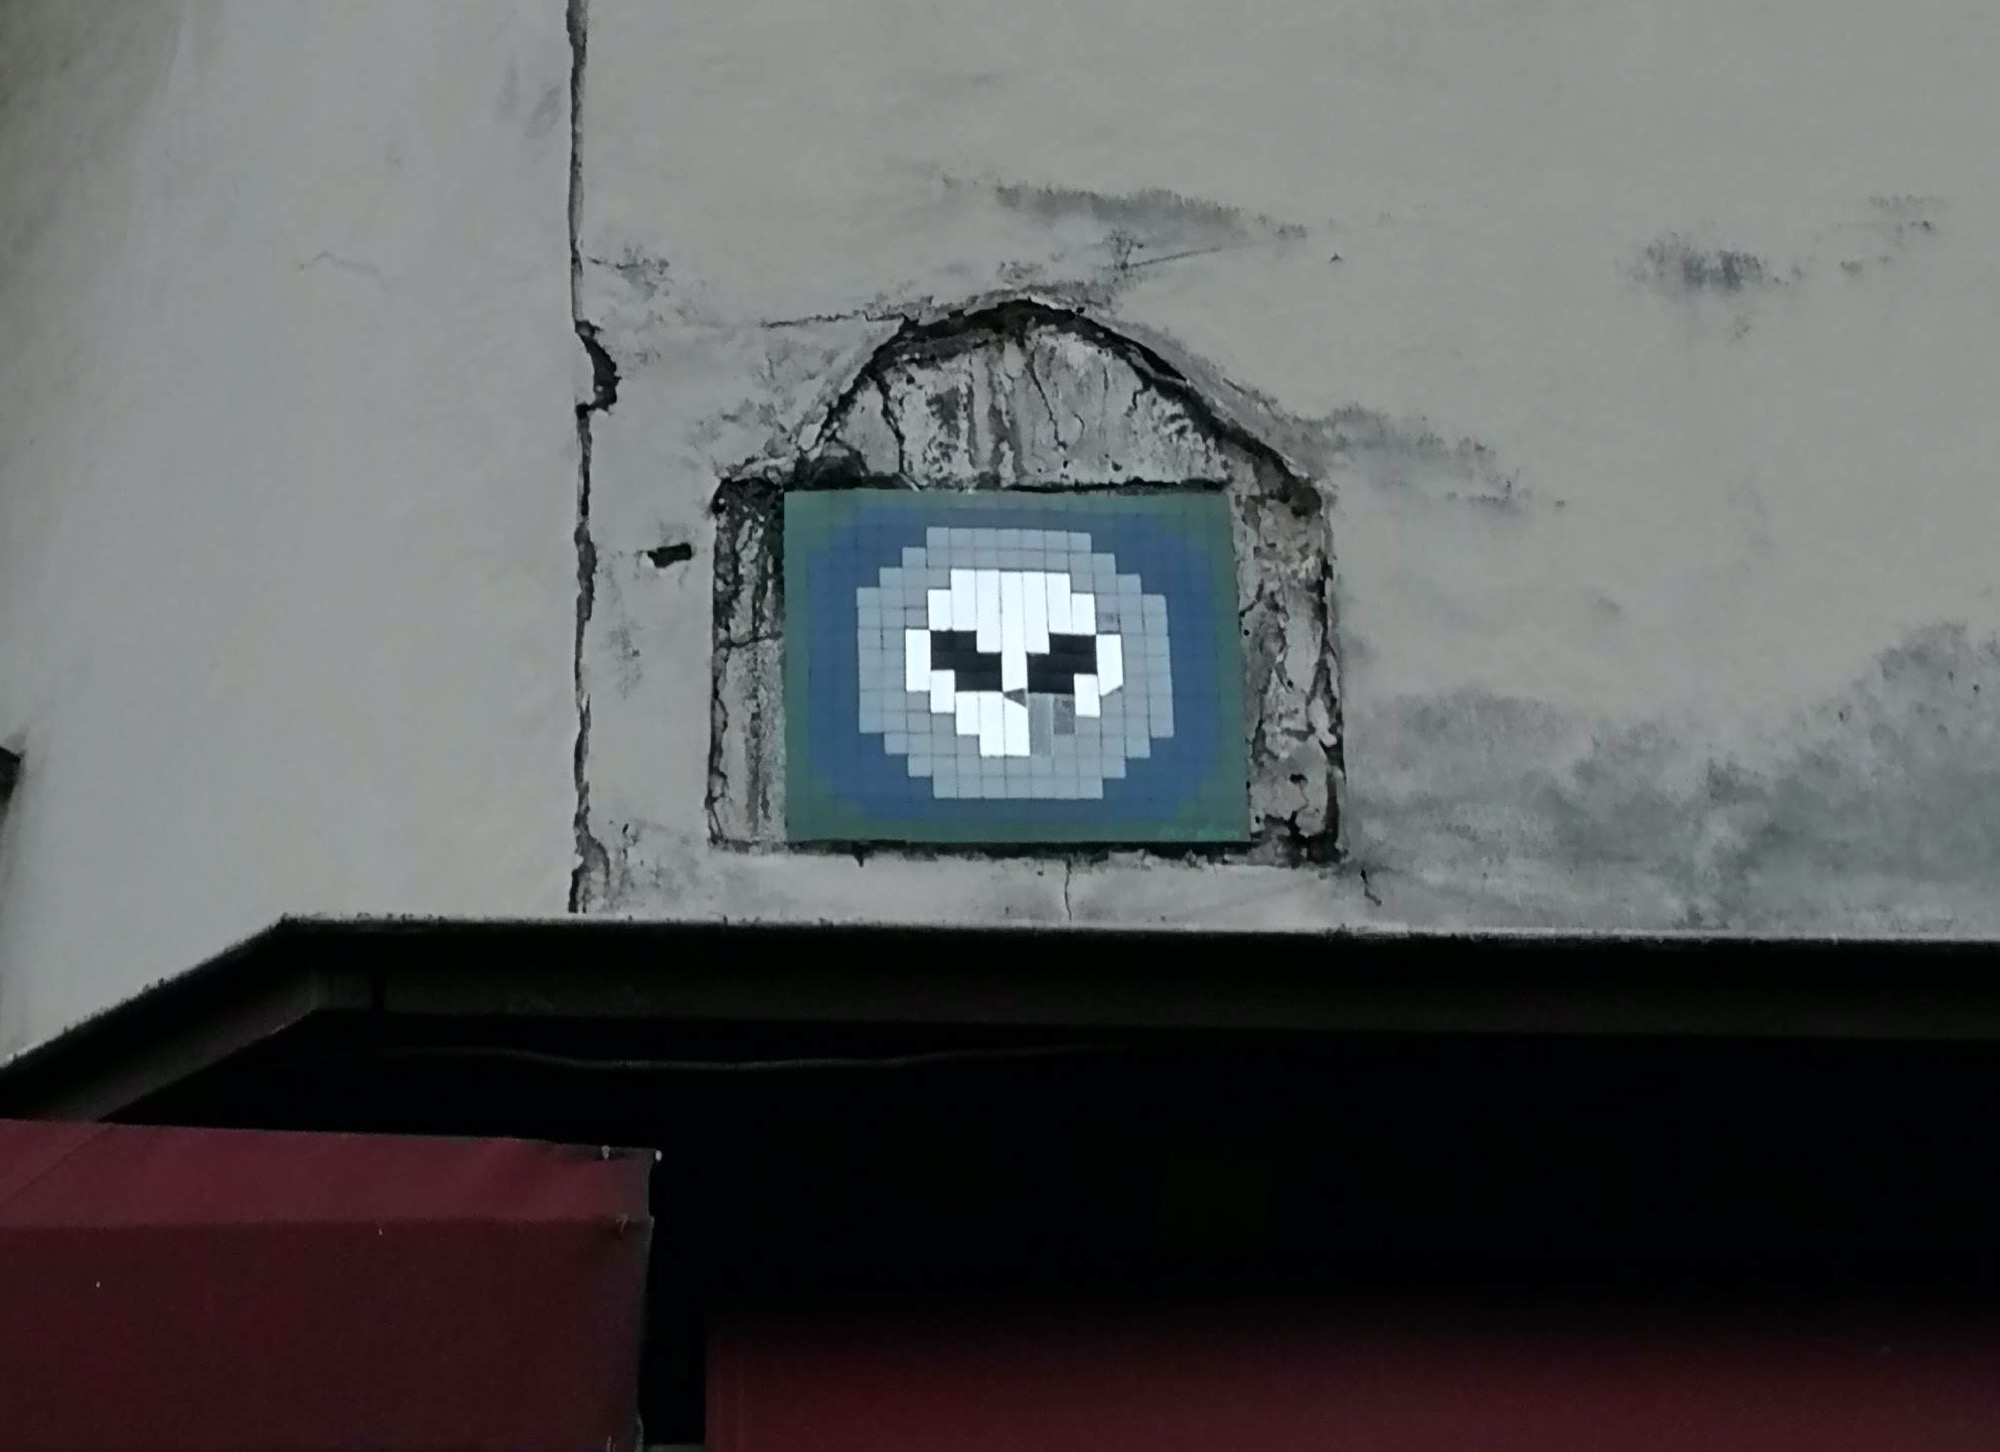 Mosaic 645  by the artist Invader captured by Rabot in Paris France